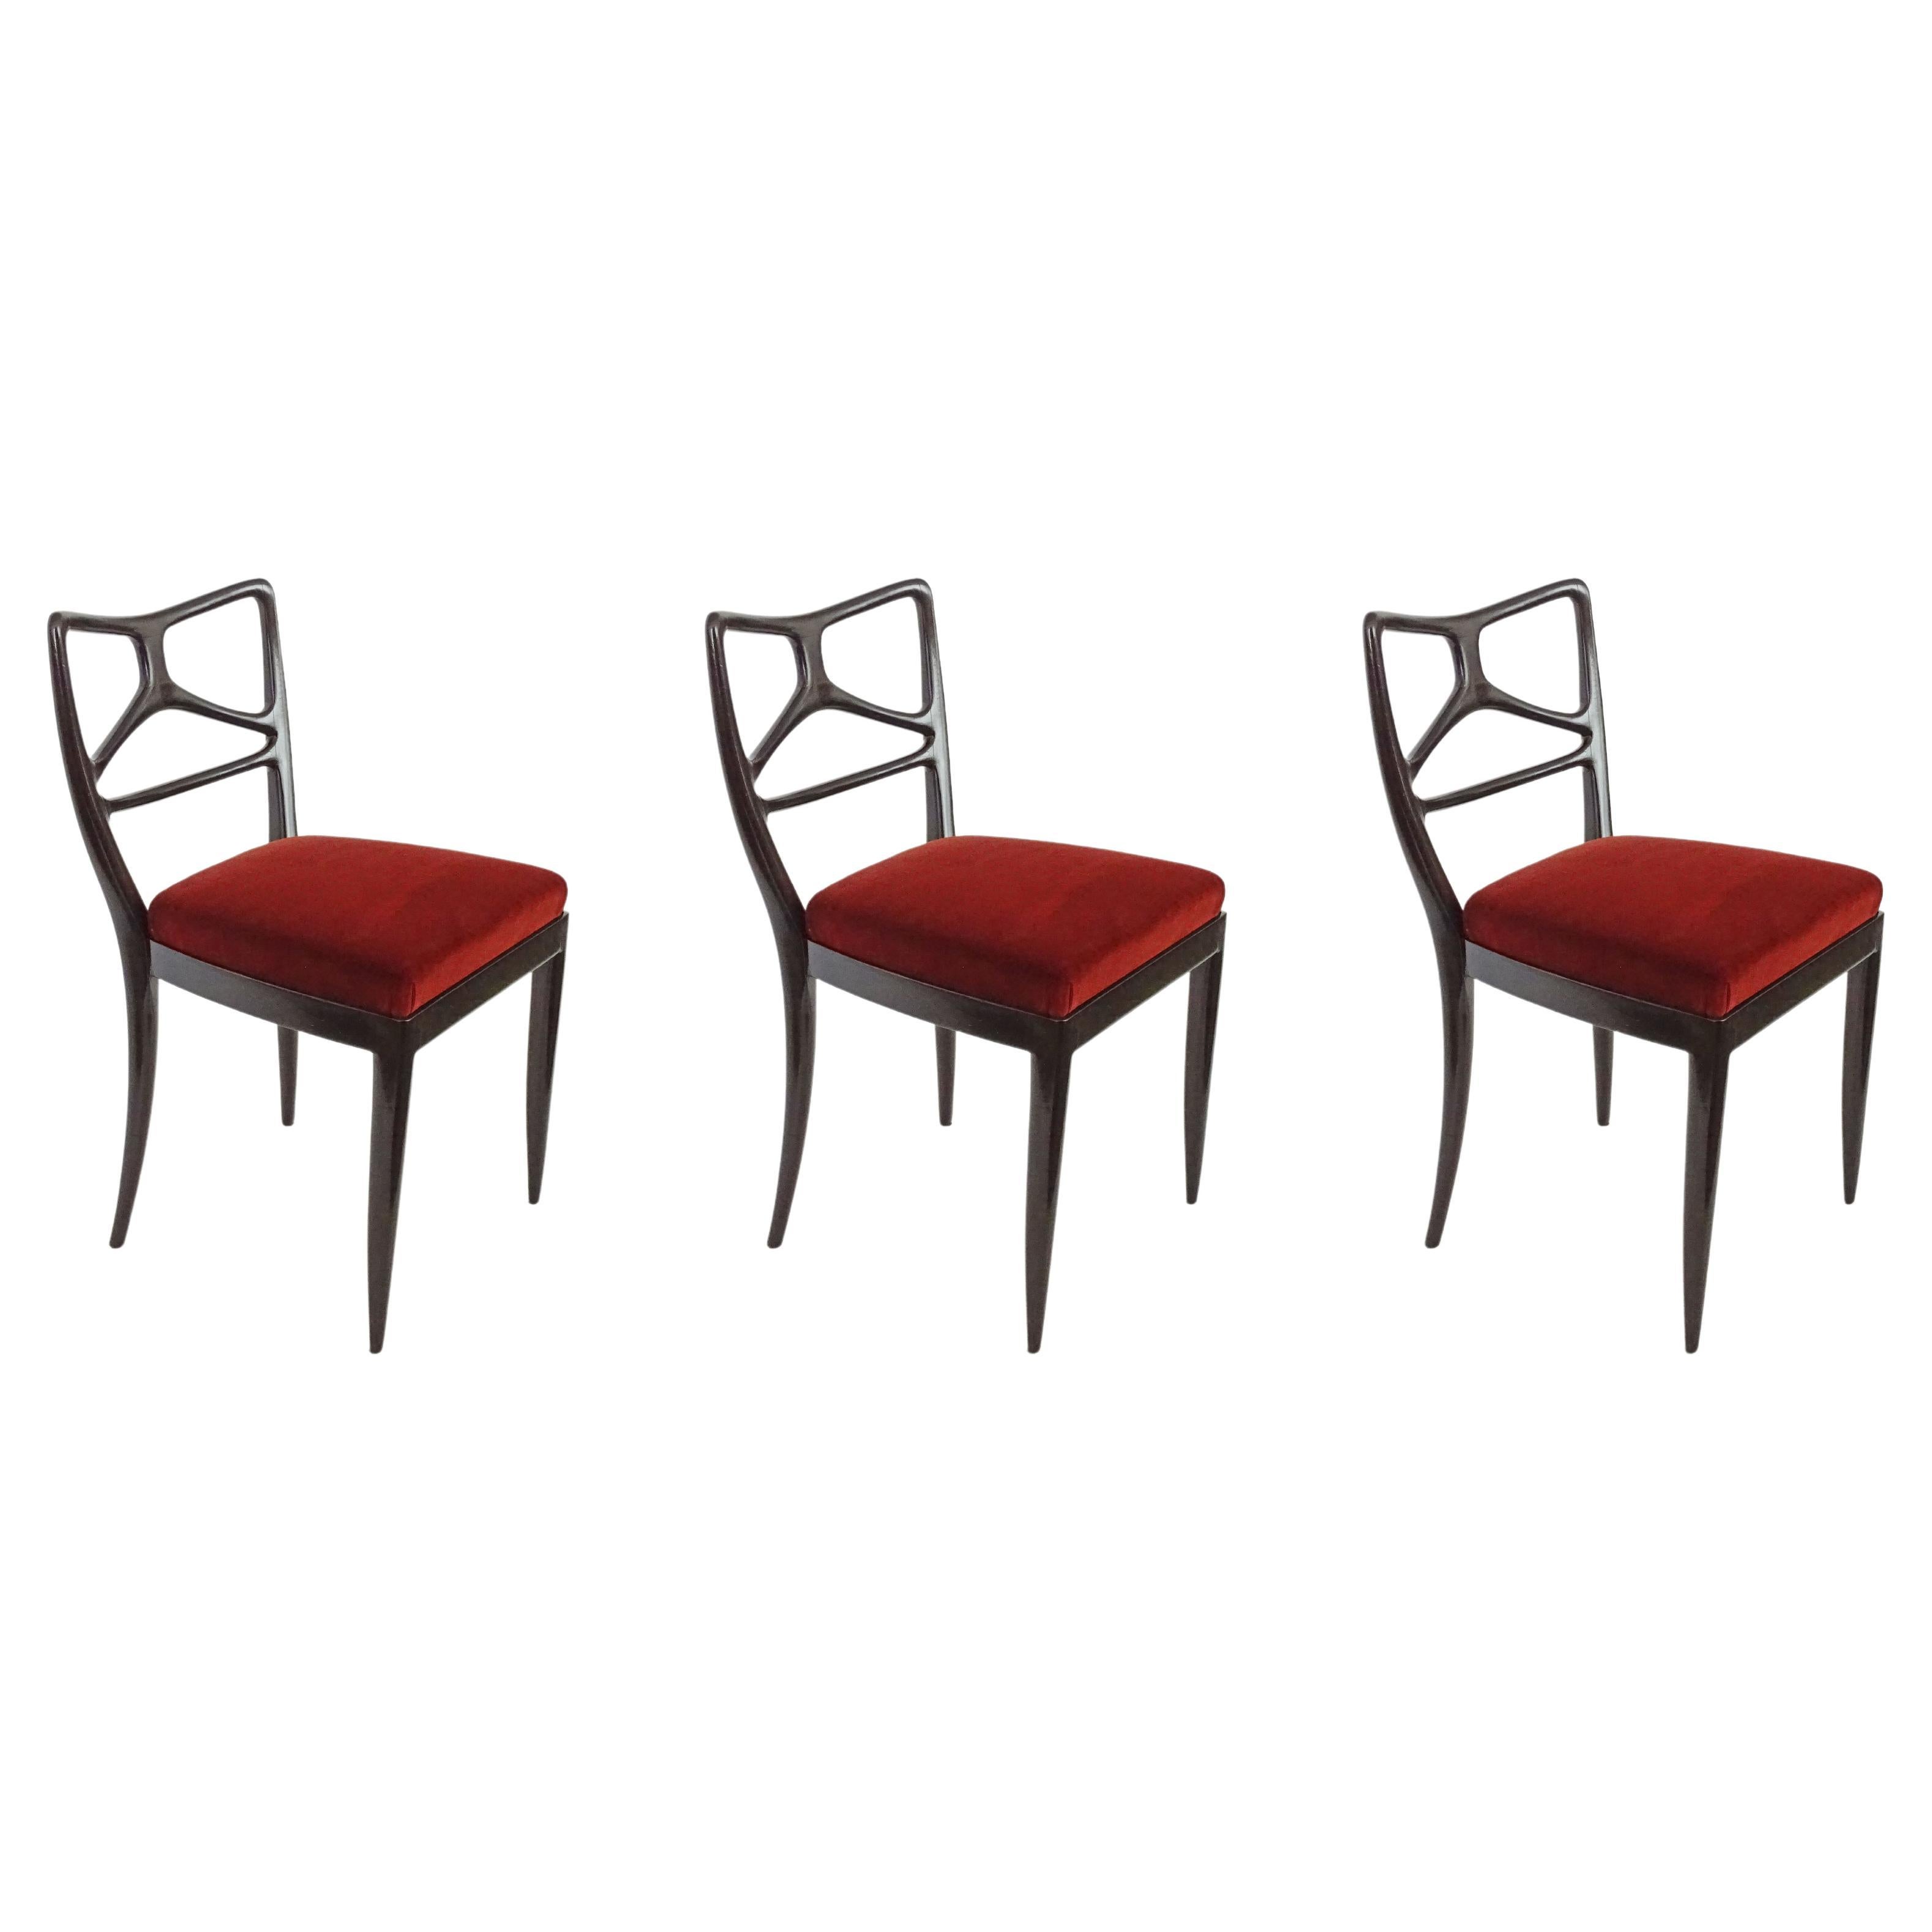 Enrico Ciuti Set of Three Chairs, Italy 1940s For Sale